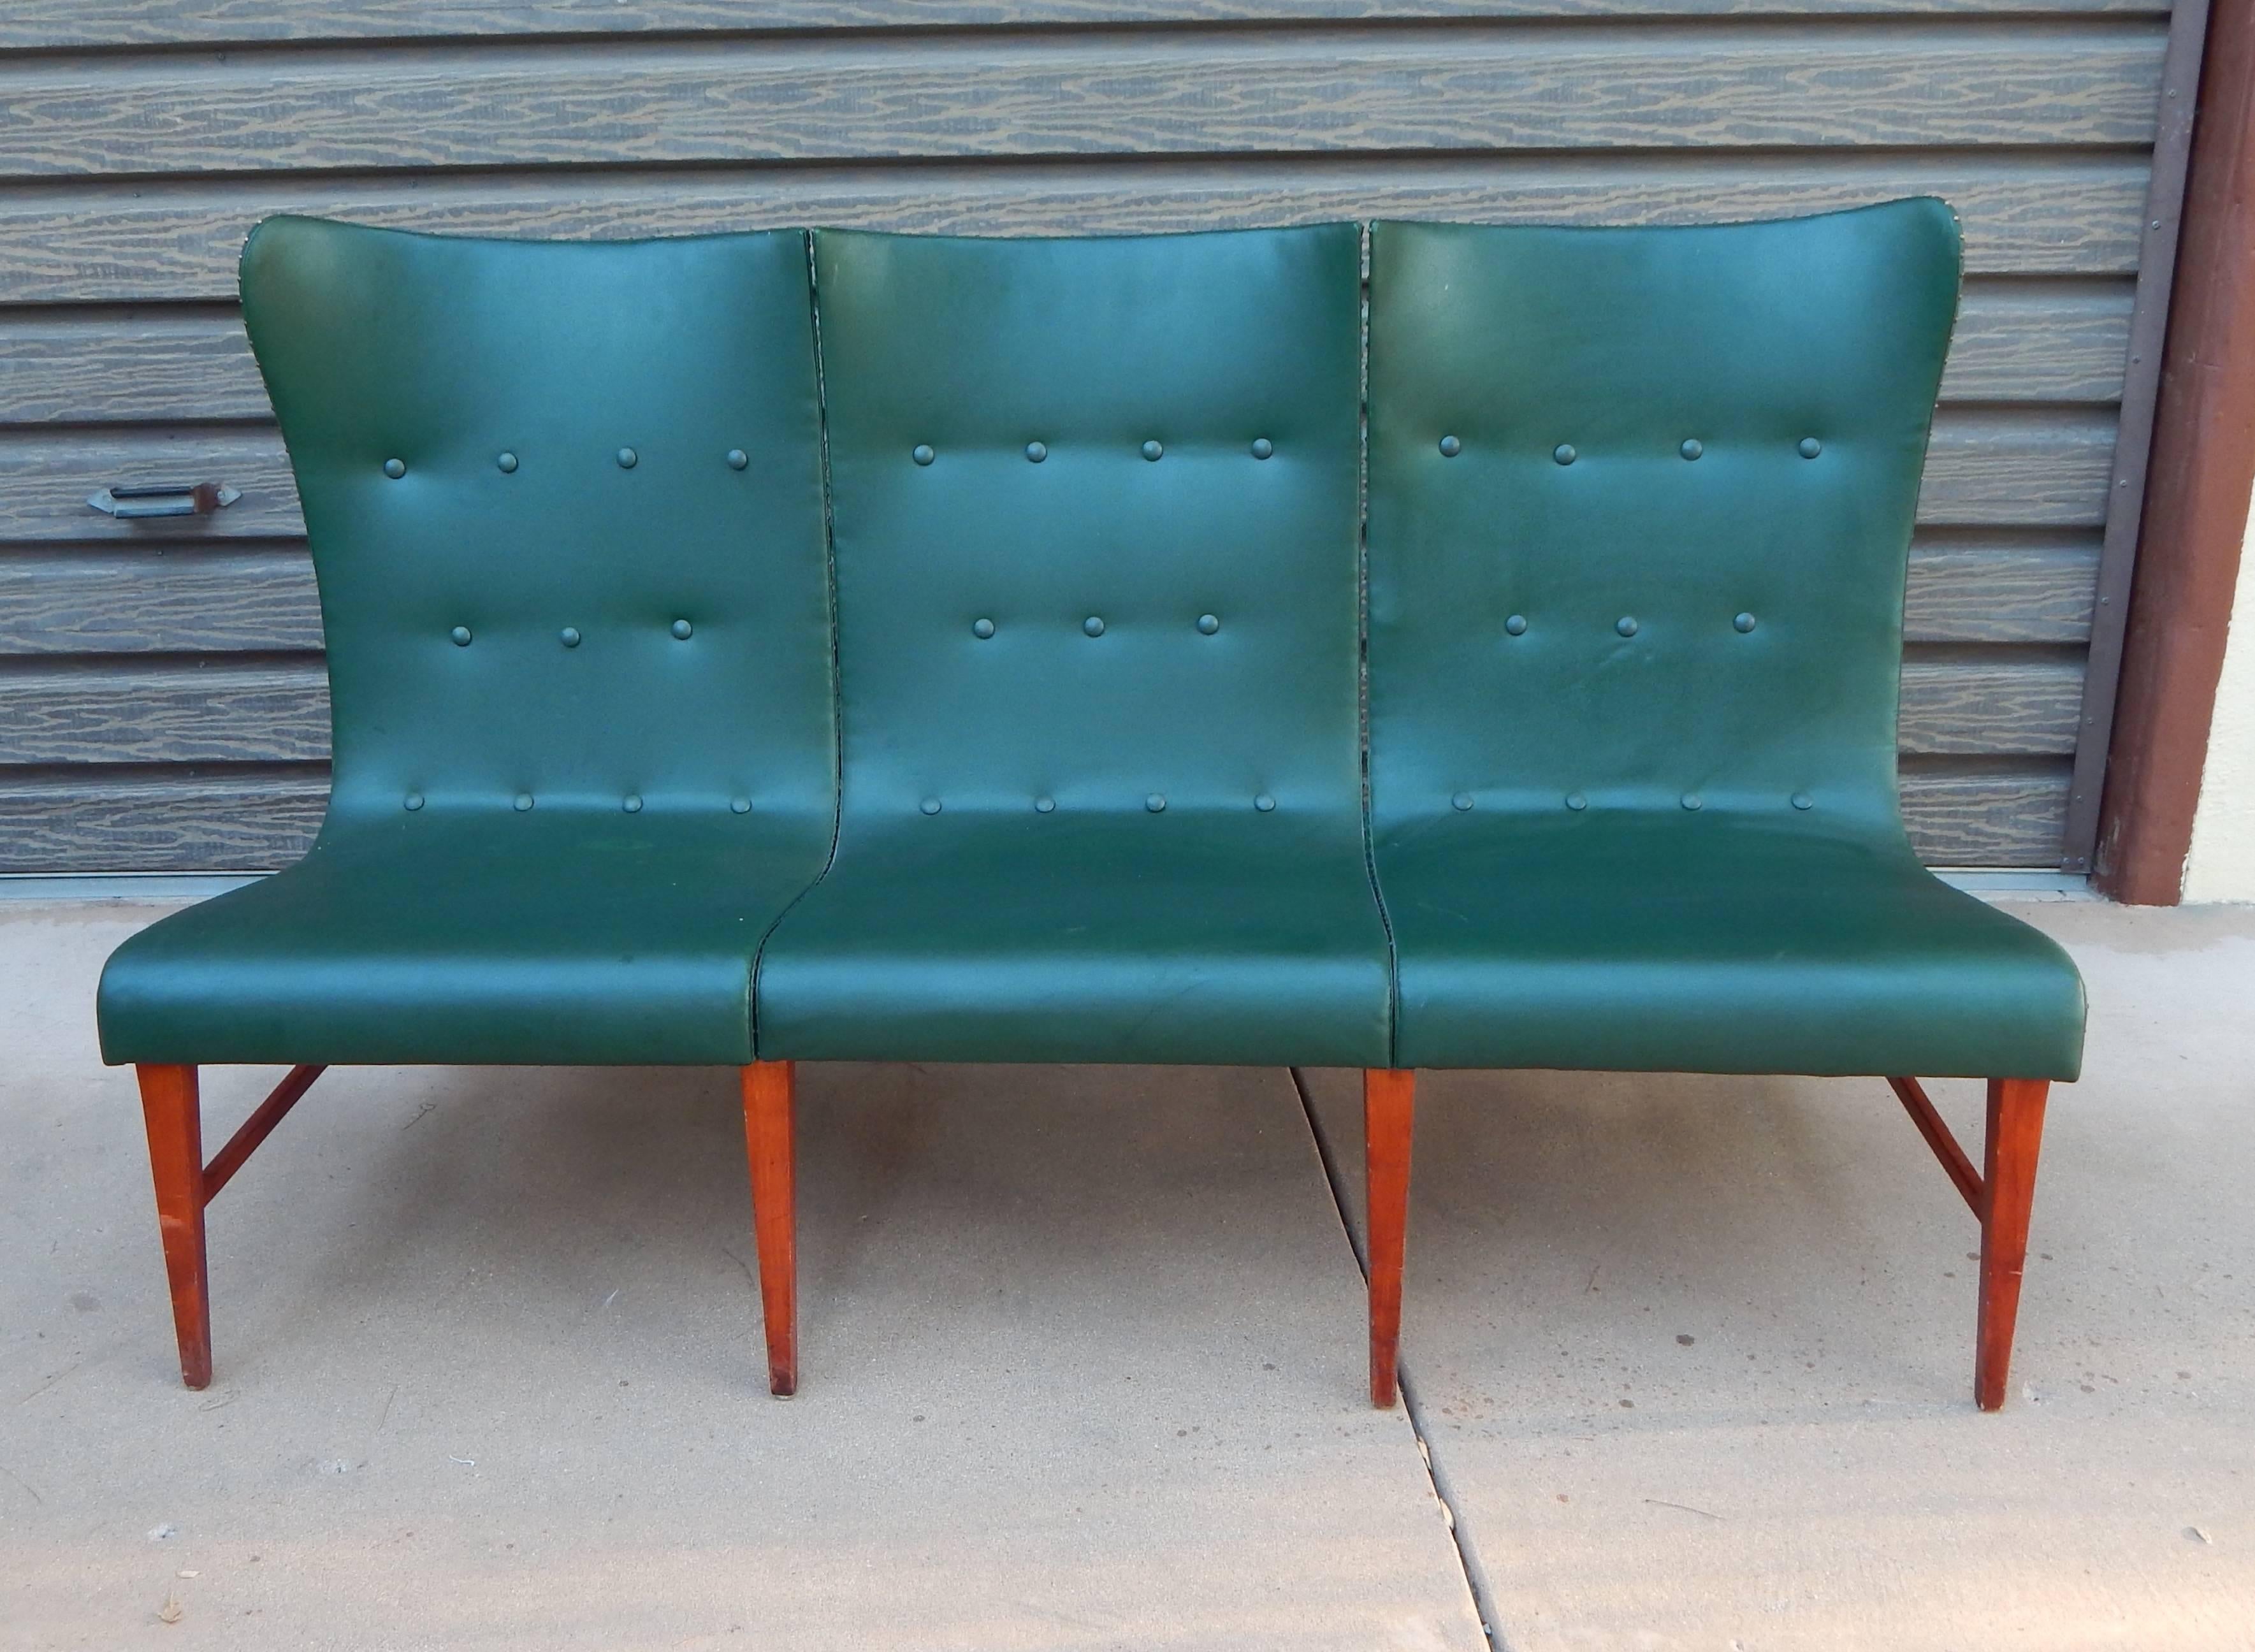 Mid-20th Century Swedish Mid-Century Modern Paneled Wingback Sofa by Axel Larsson, circa 1950 For Sale